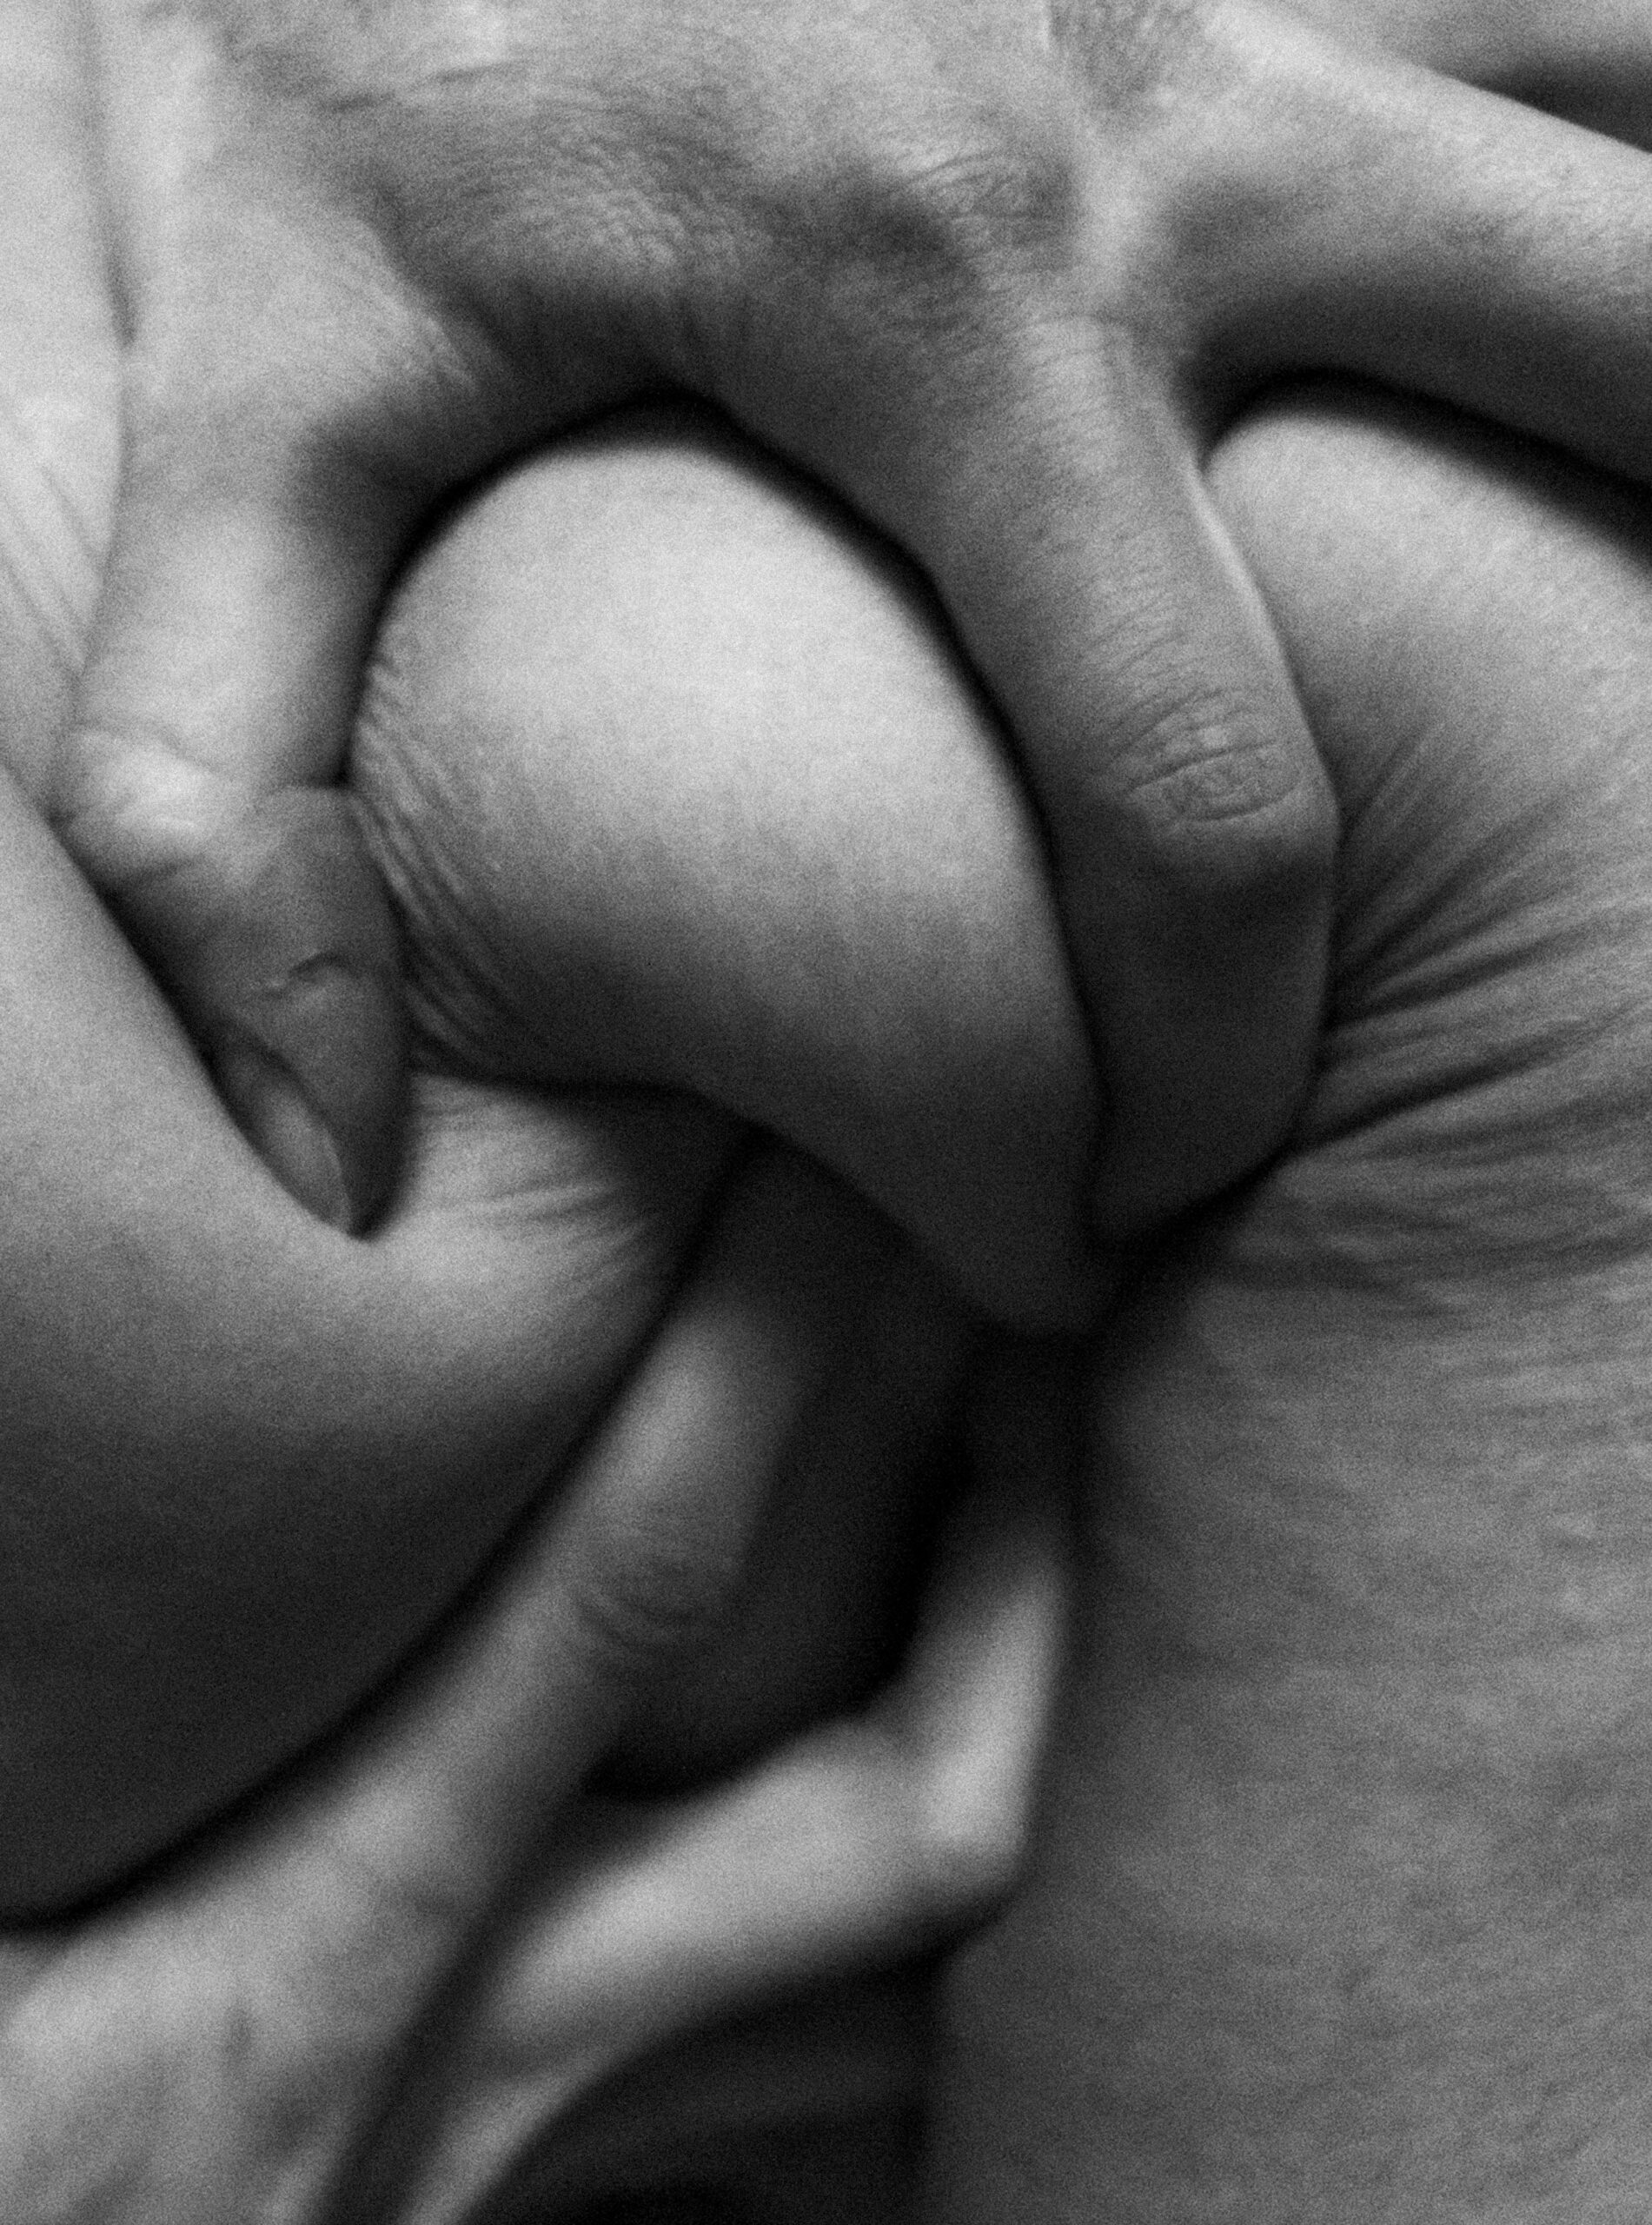 6. Kneading II, from the series Series of conversations, 2018 – ongoing © Laura Hospes, courtesy LANGart, Amsterdam